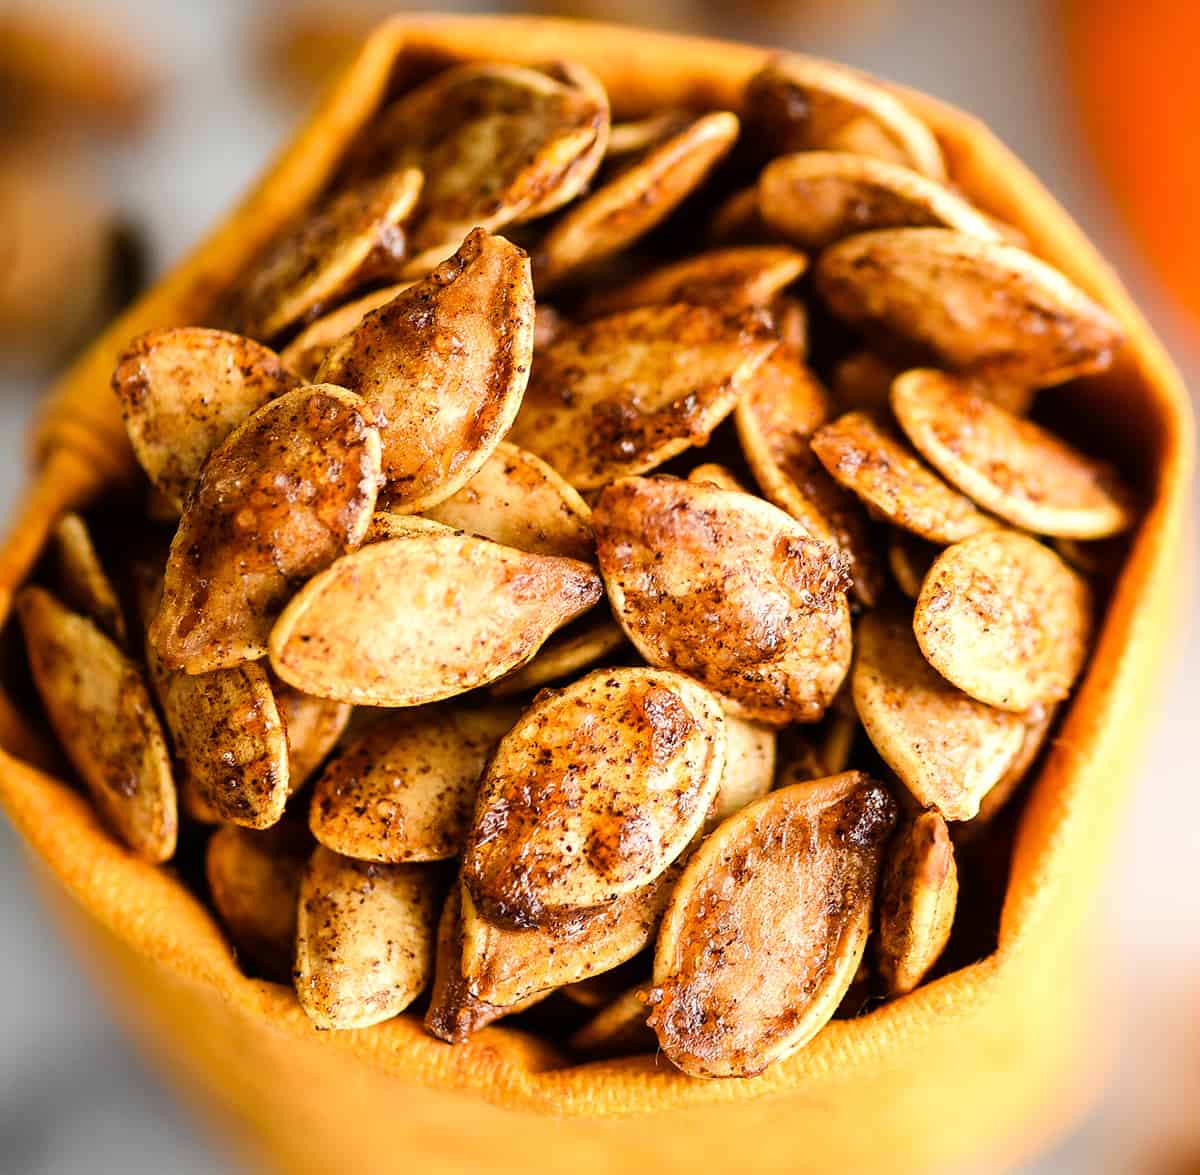 up close front view of Homemade Cinnamon Sugar Pumpkin Seeds in a small bag